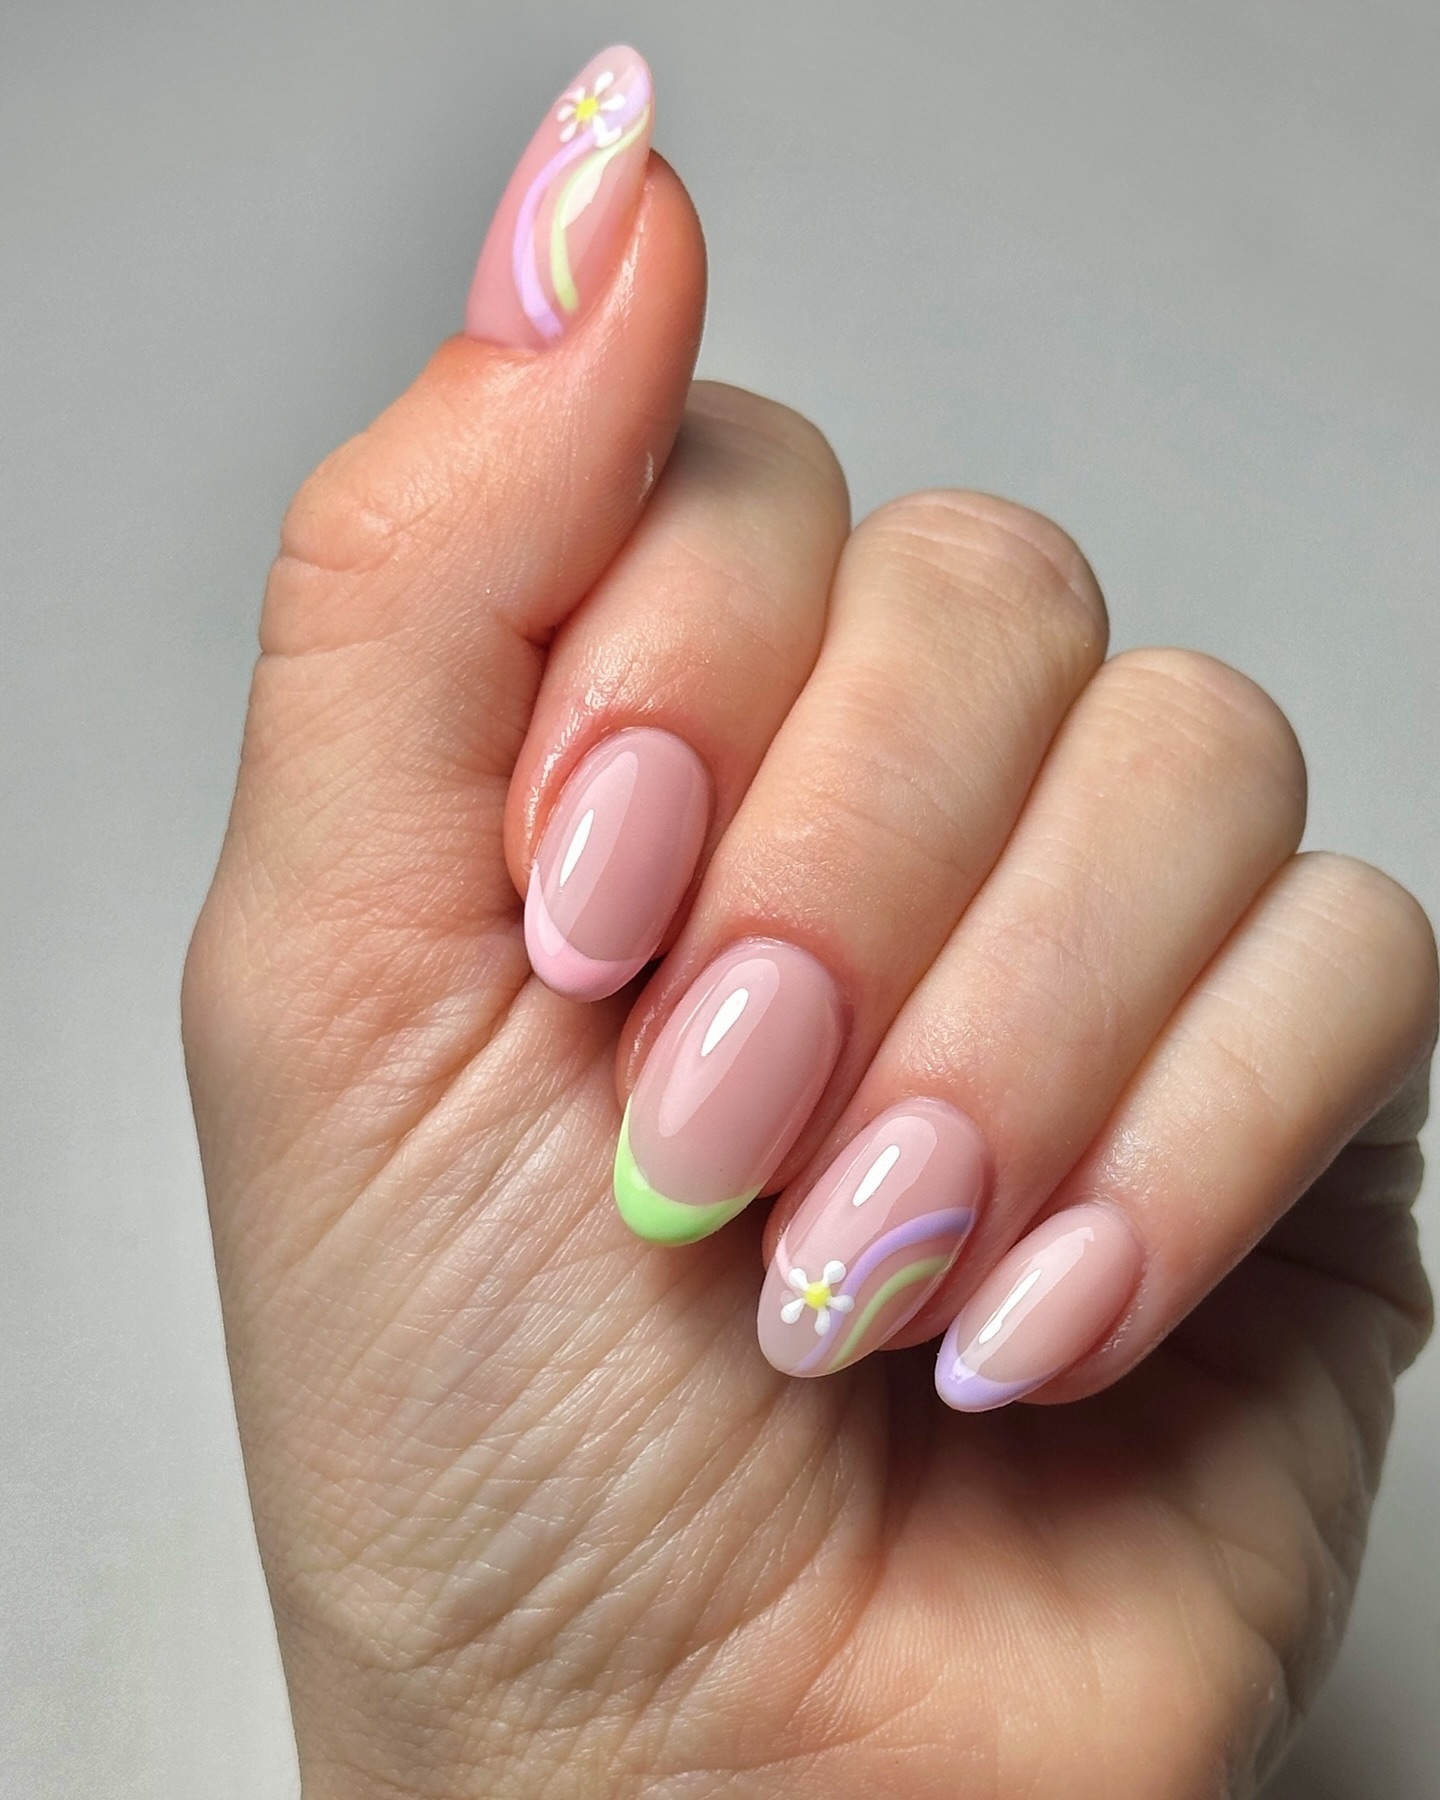 Spring french tip nails with a mix of pink and blue french tip nails, embodying spring nail designs and colorful nails for the season.